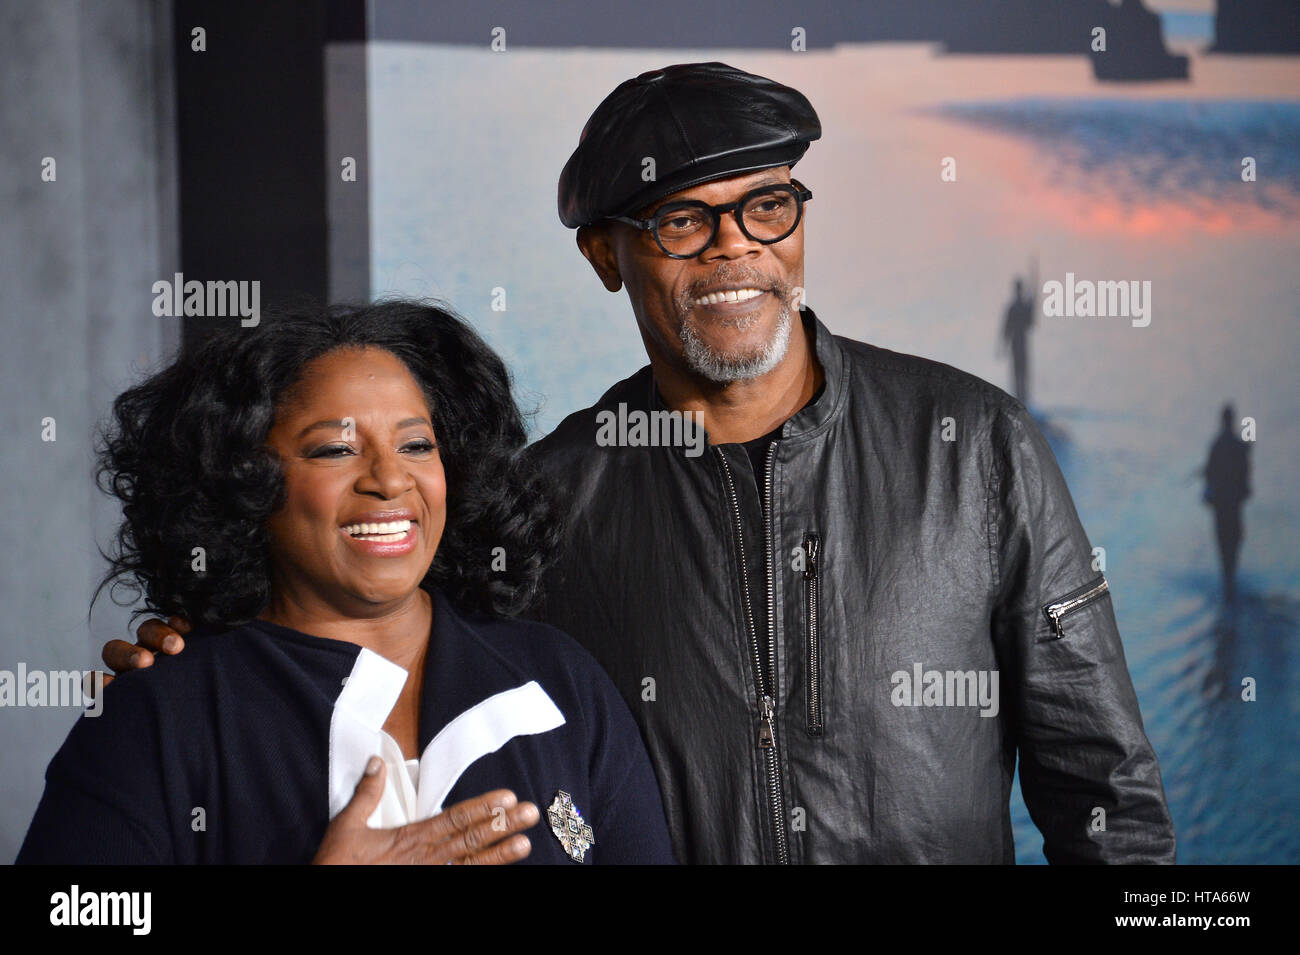 Los Angeles, USA. 08th Mar, 2017. LOS ANGELES, CA. March 8, 2017: Actor Samuel L. Jackson & wife LaTanya Richardson at the premiere for 'Kong: Skull Island' at Dolby Theatre, Hollywood. Picture Credit: Sarah Stewart/Alamy Live News Stock Photo